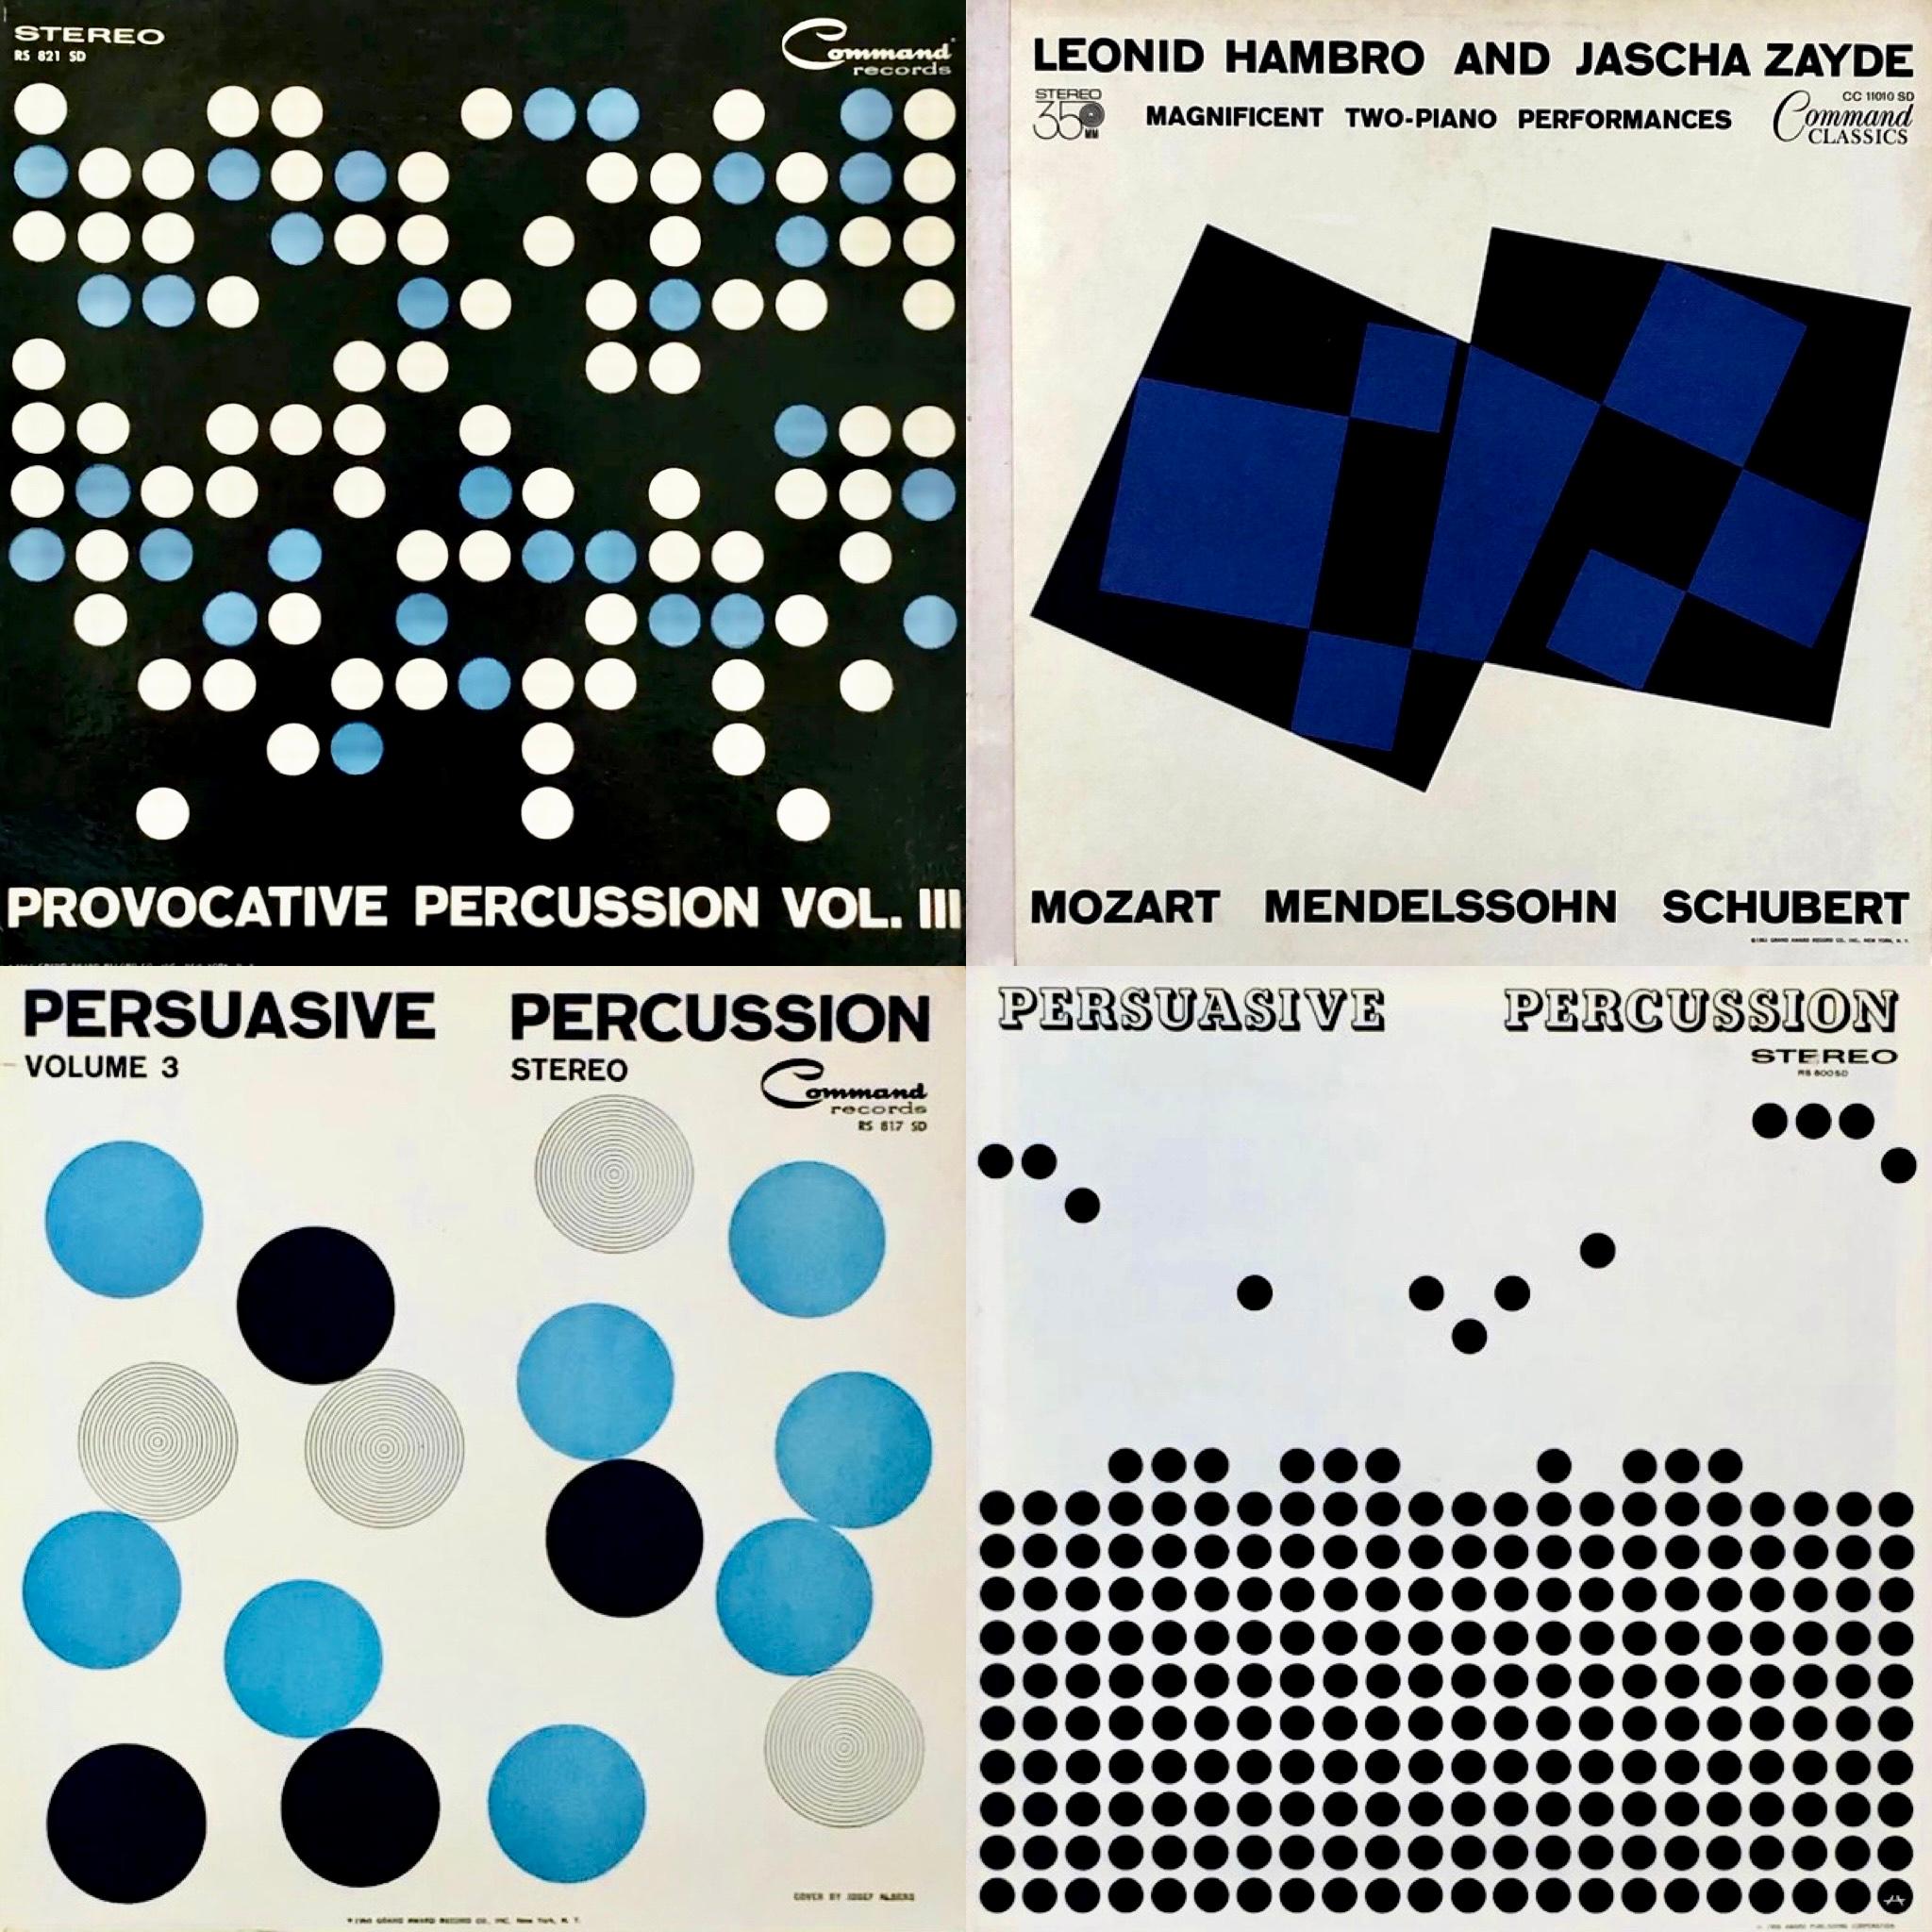 Josef Albers Album Art late 1950s to early 60s:
A set of 4 vinyl record covers (containing their records) brilliantly illustrated & designed by Josef Albers between 1958 and 1962. Looks fantastic framed as a group.

Offset lithograph on vinyl album